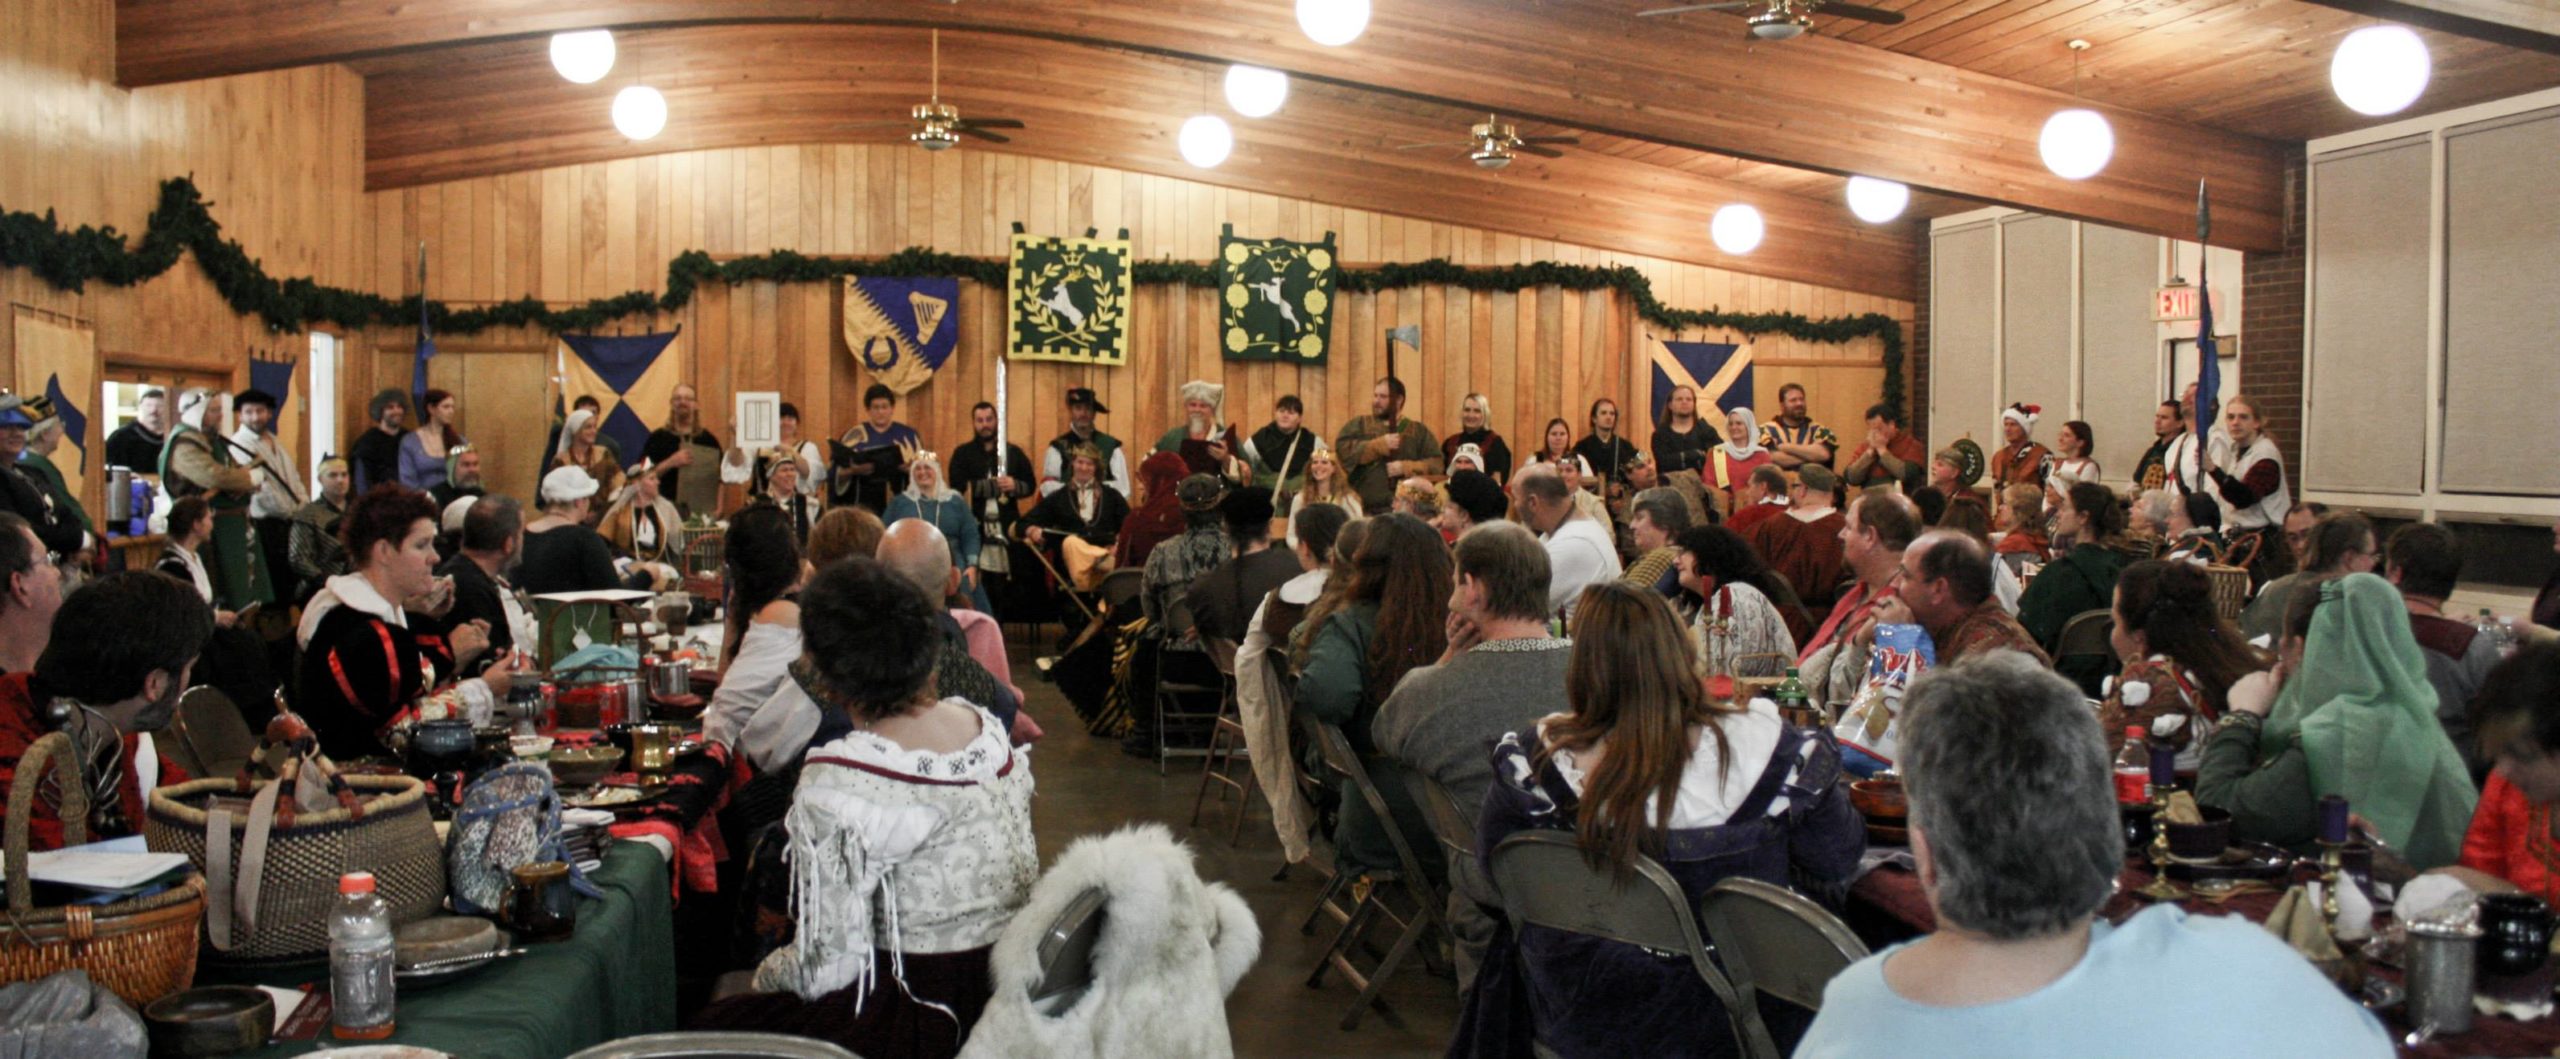 People eating feast during a court in a decorated hall